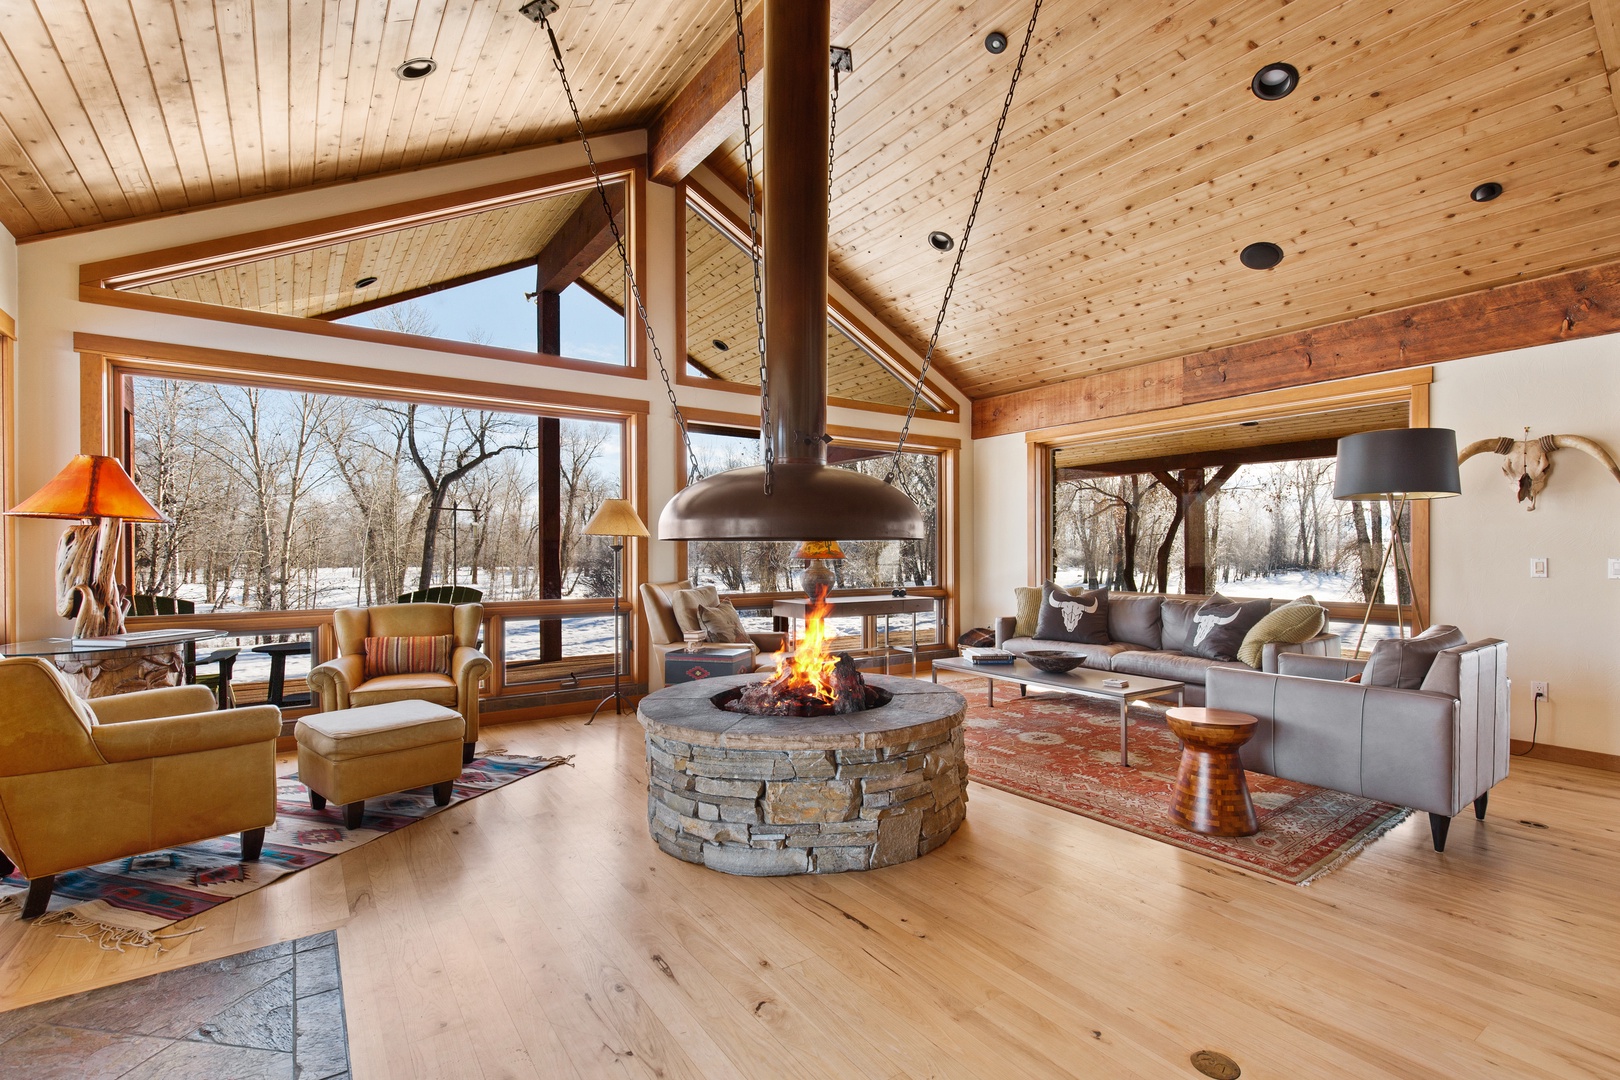 Bozeman Vacation Rentals, The Woodland Oasis - One of a kind fireplace